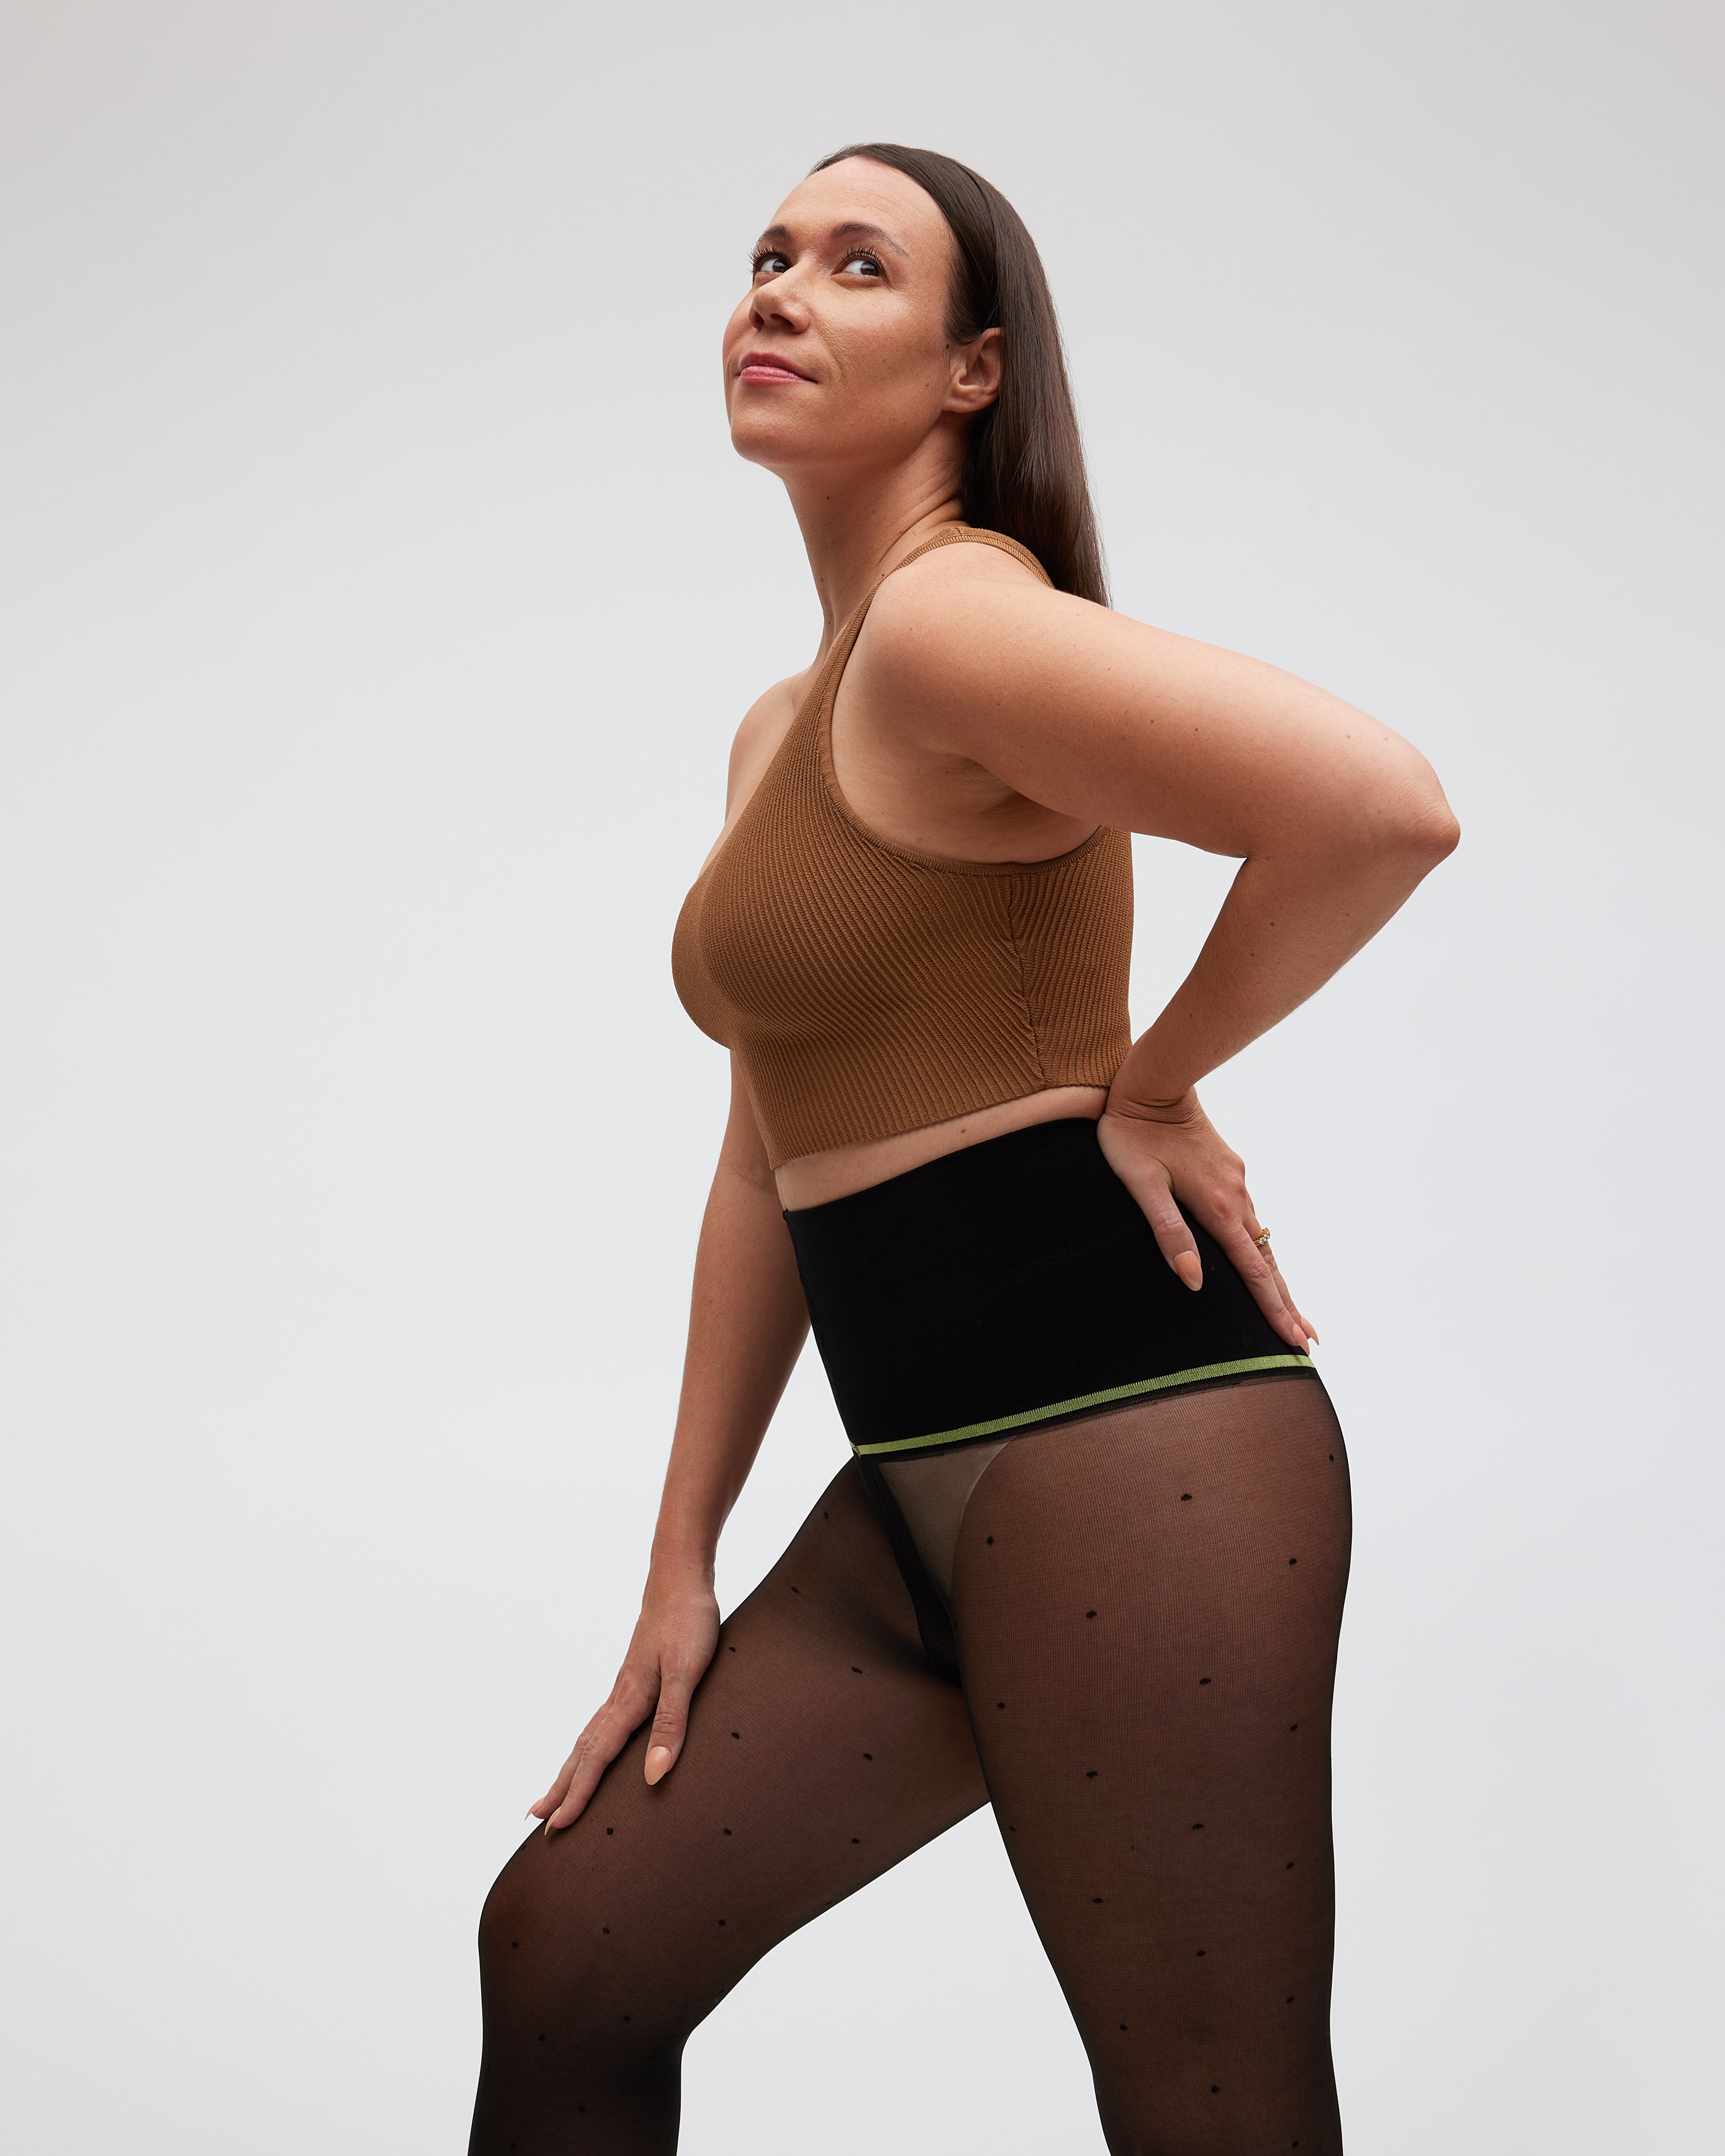 null, Mini Dot Super Sheer Rip-Resist Tights, micro-dot-super-sheer-rip-resist-tights, sheertex, product image, unbreakable tights, model